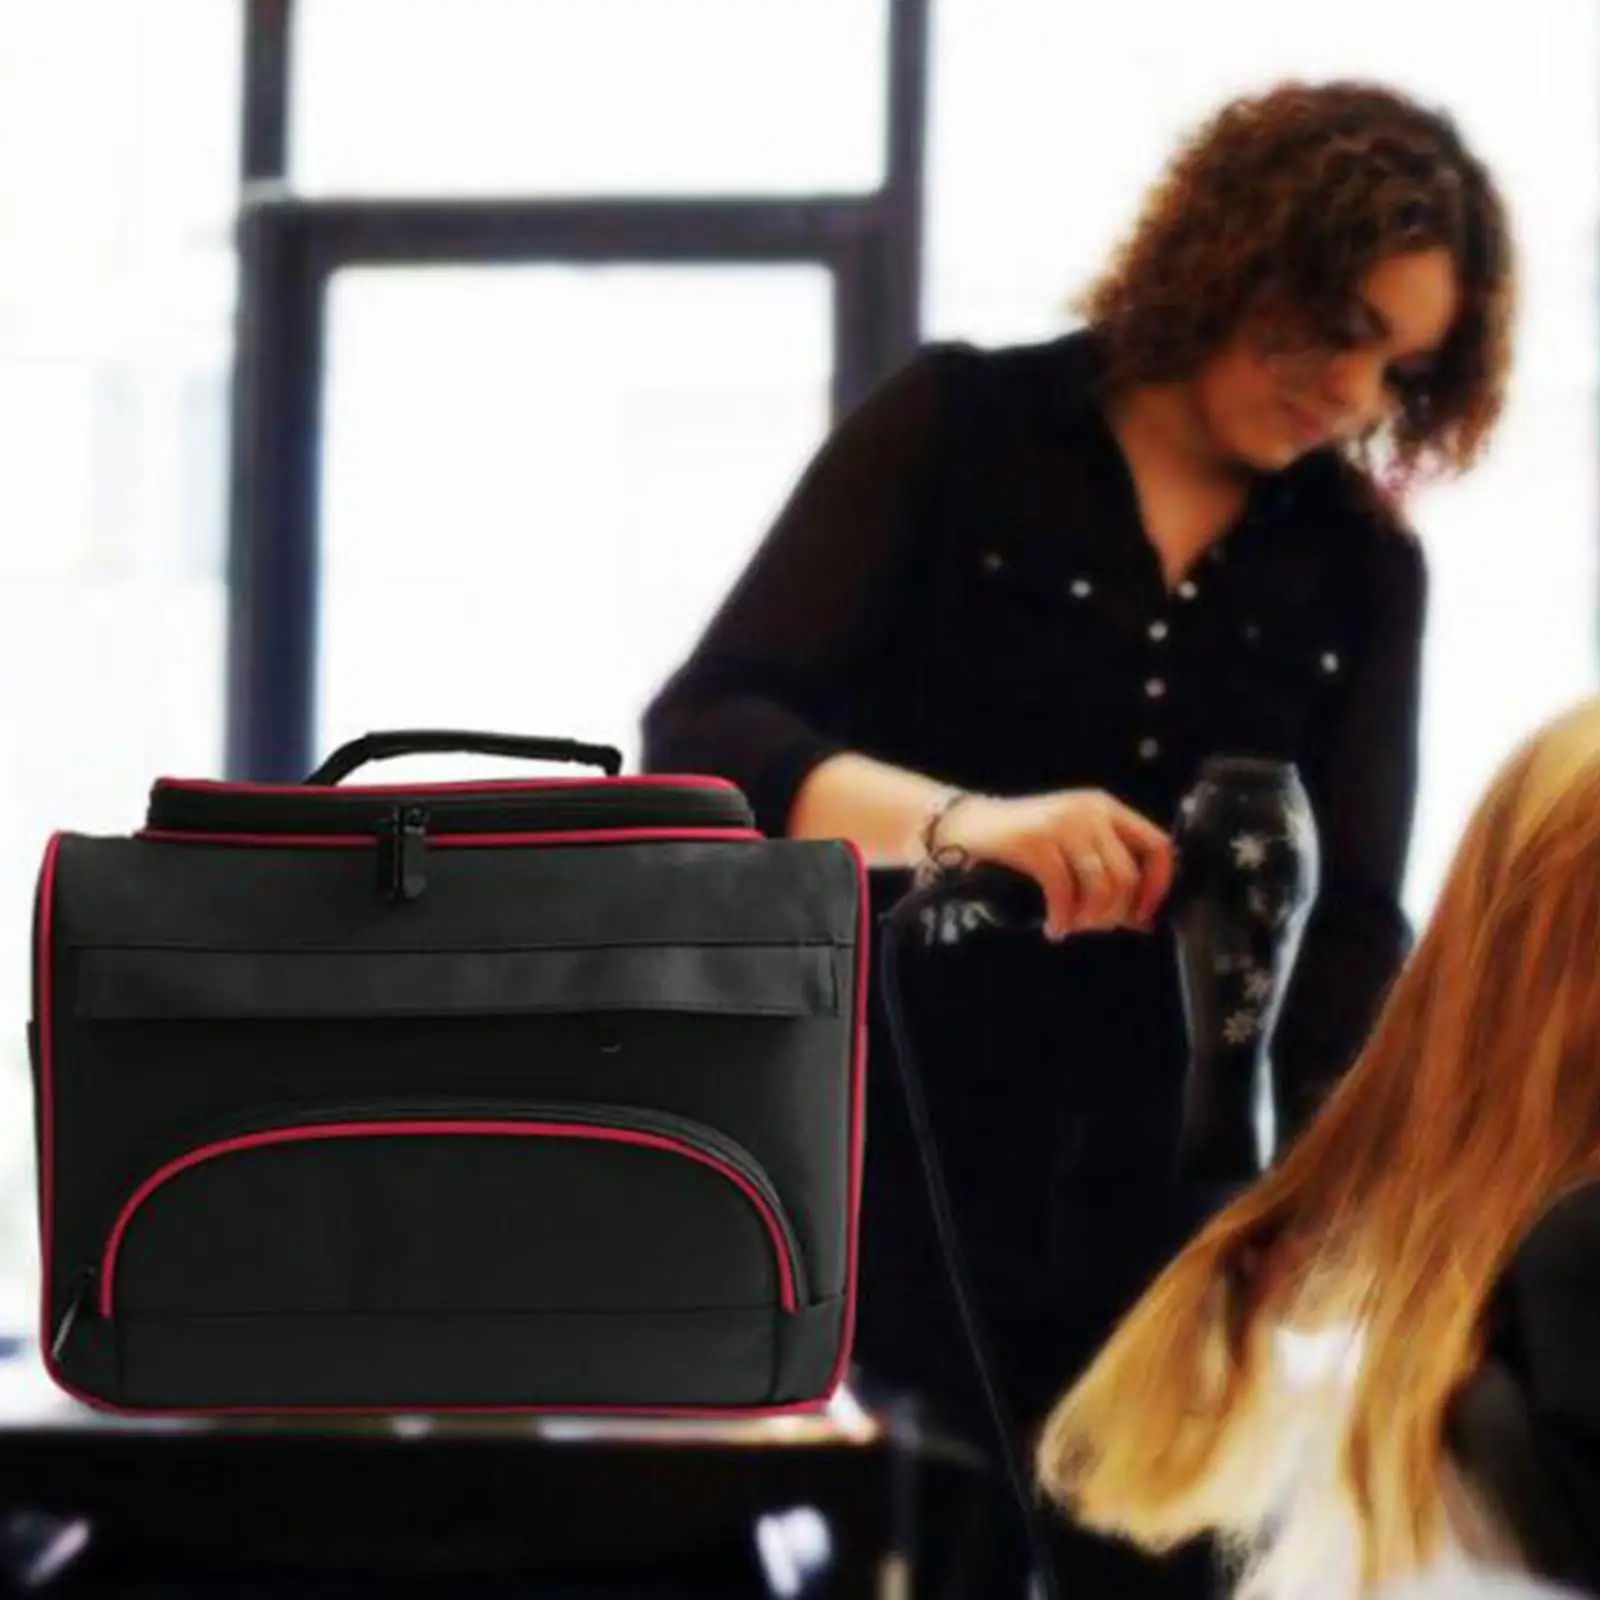 Portable Large Capacity Salon Barber Hand Hairdressing Tools  Case Carrier Organizer